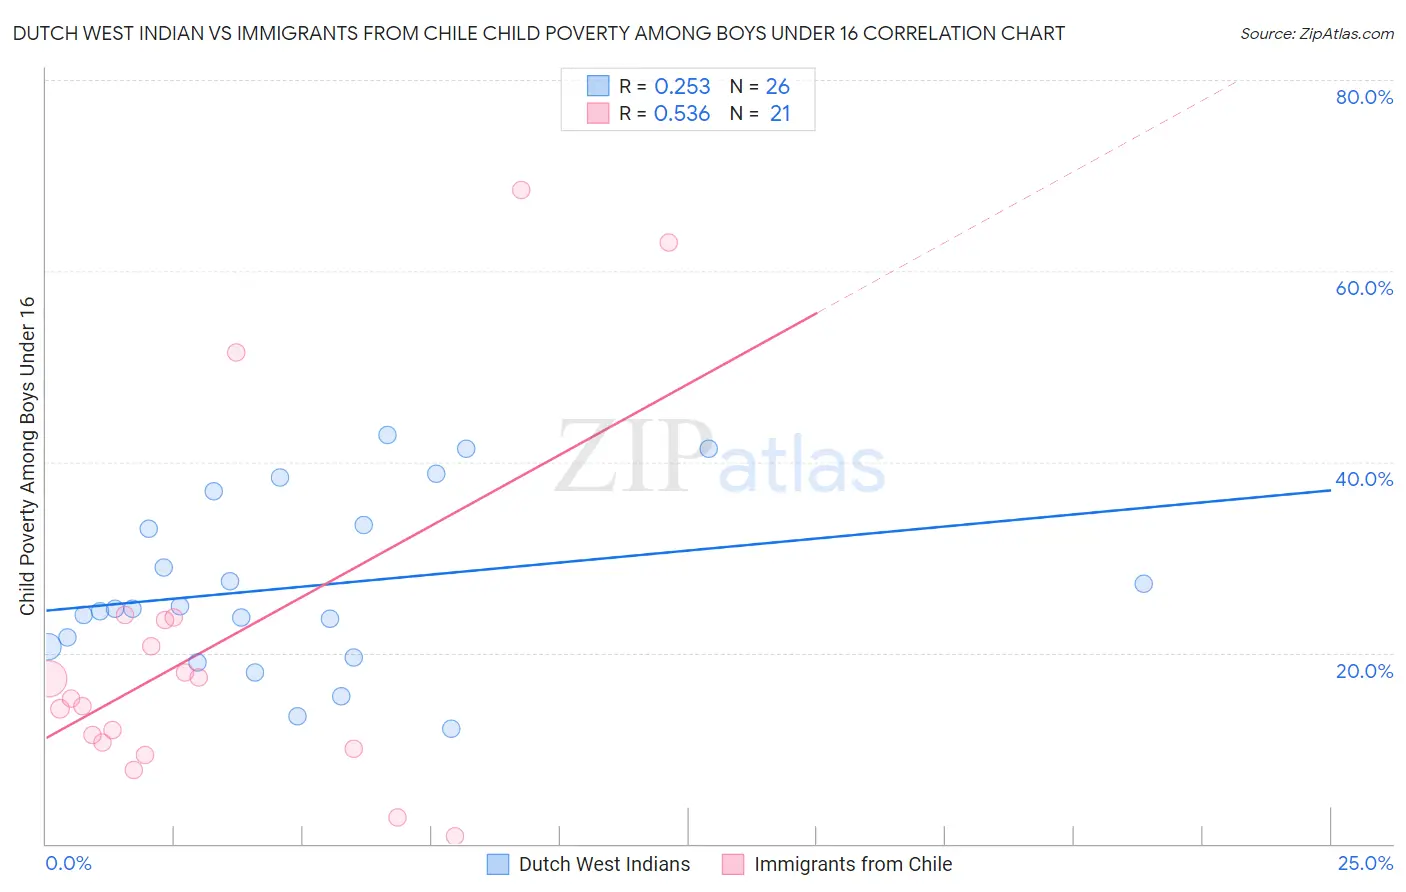 Dutch West Indian vs Immigrants from Chile Child Poverty Among Boys Under 16